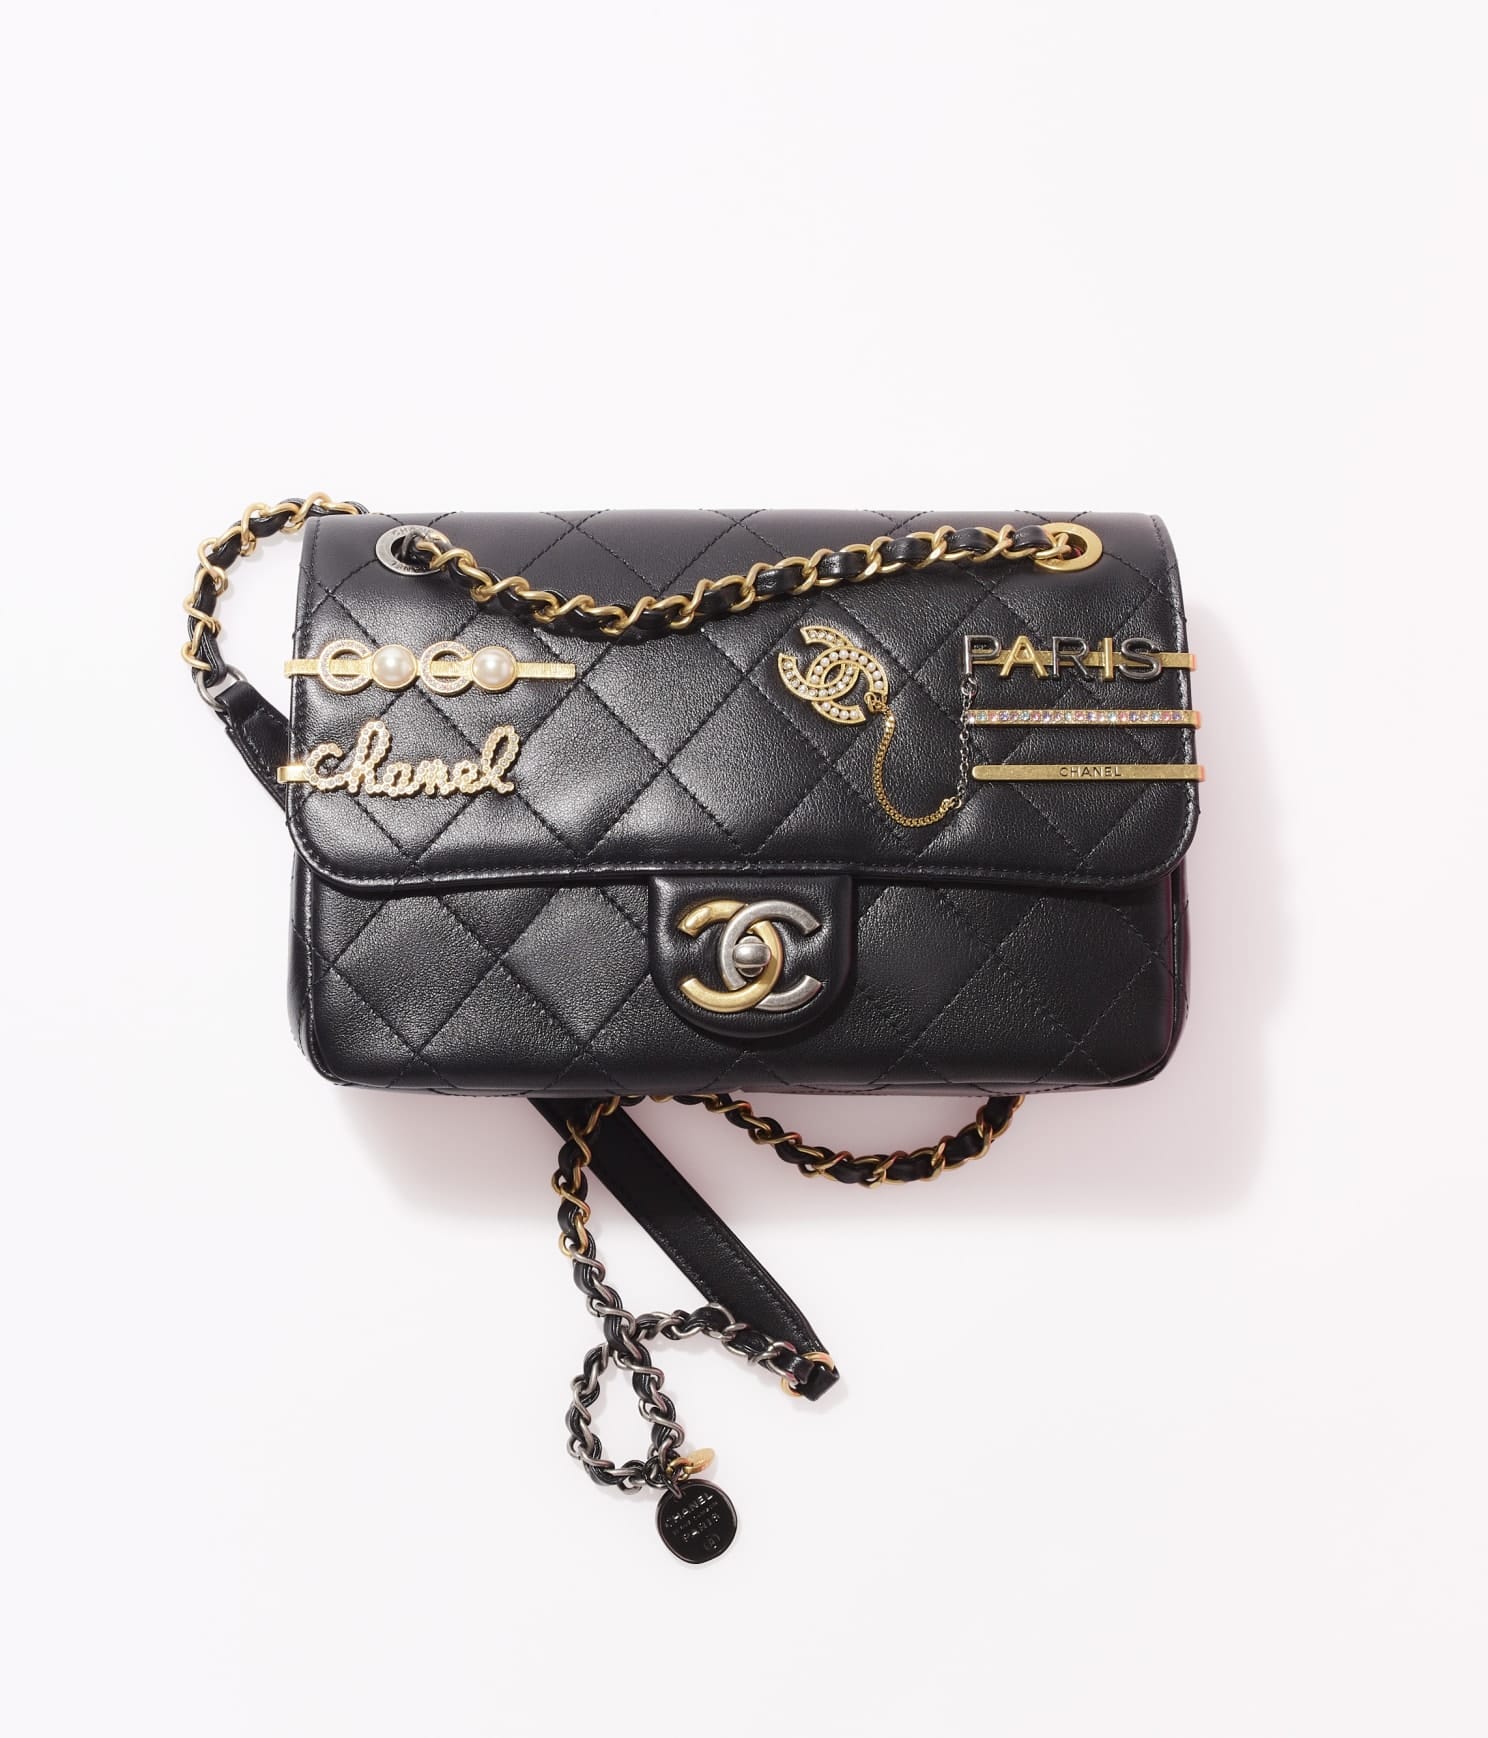 Chanel Small Flap Bag Embellished Glass Pearls Black